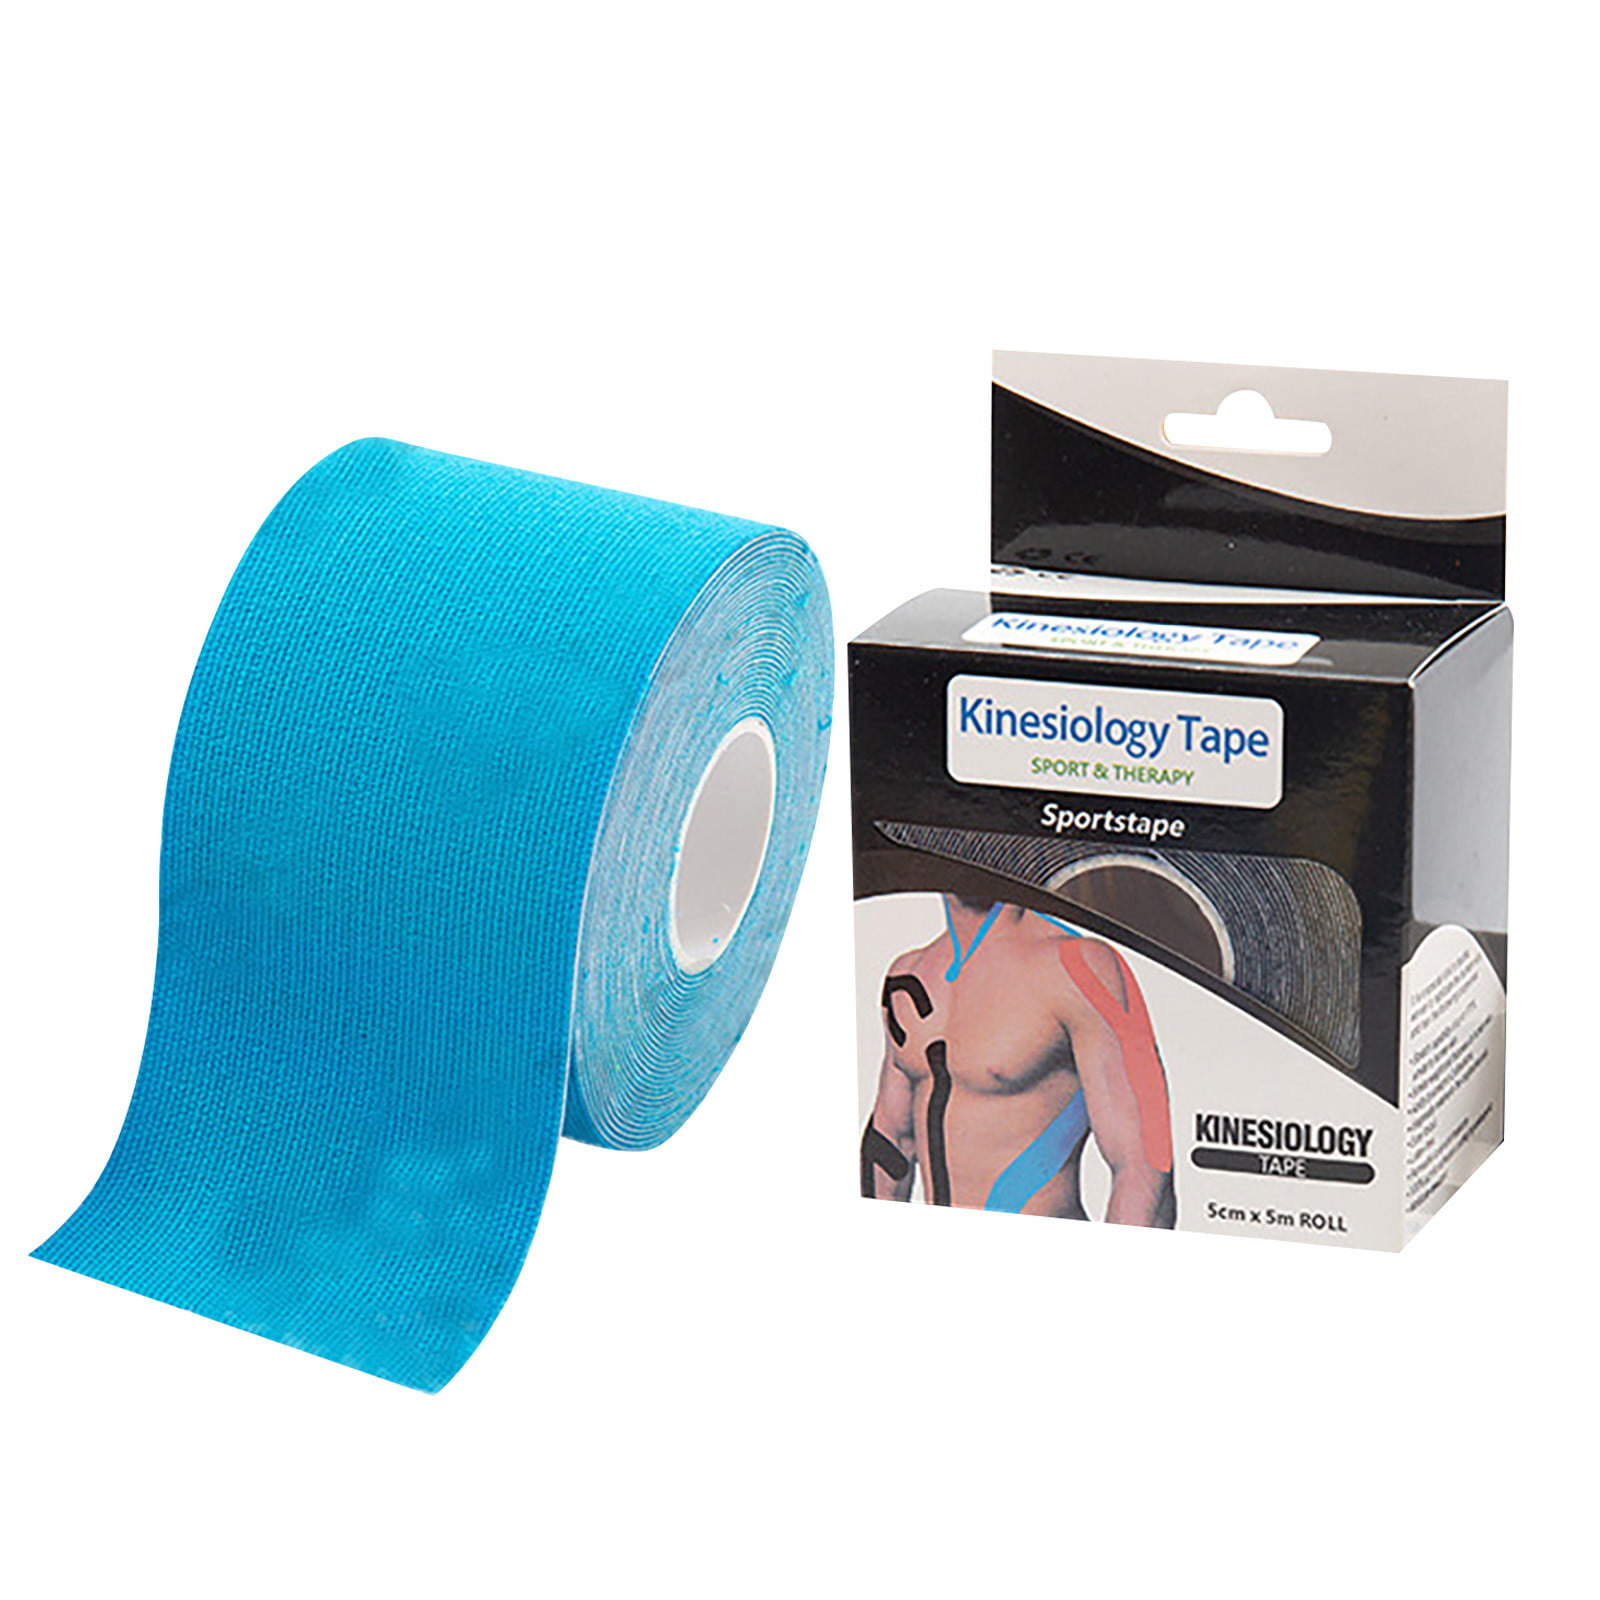  Kinesiology Goat Tape Athletic Tape. Blue Fabric with White Ink  Print. Precut Strips. 5cm x 5m. Sold as Single Rolls. : Health & Household